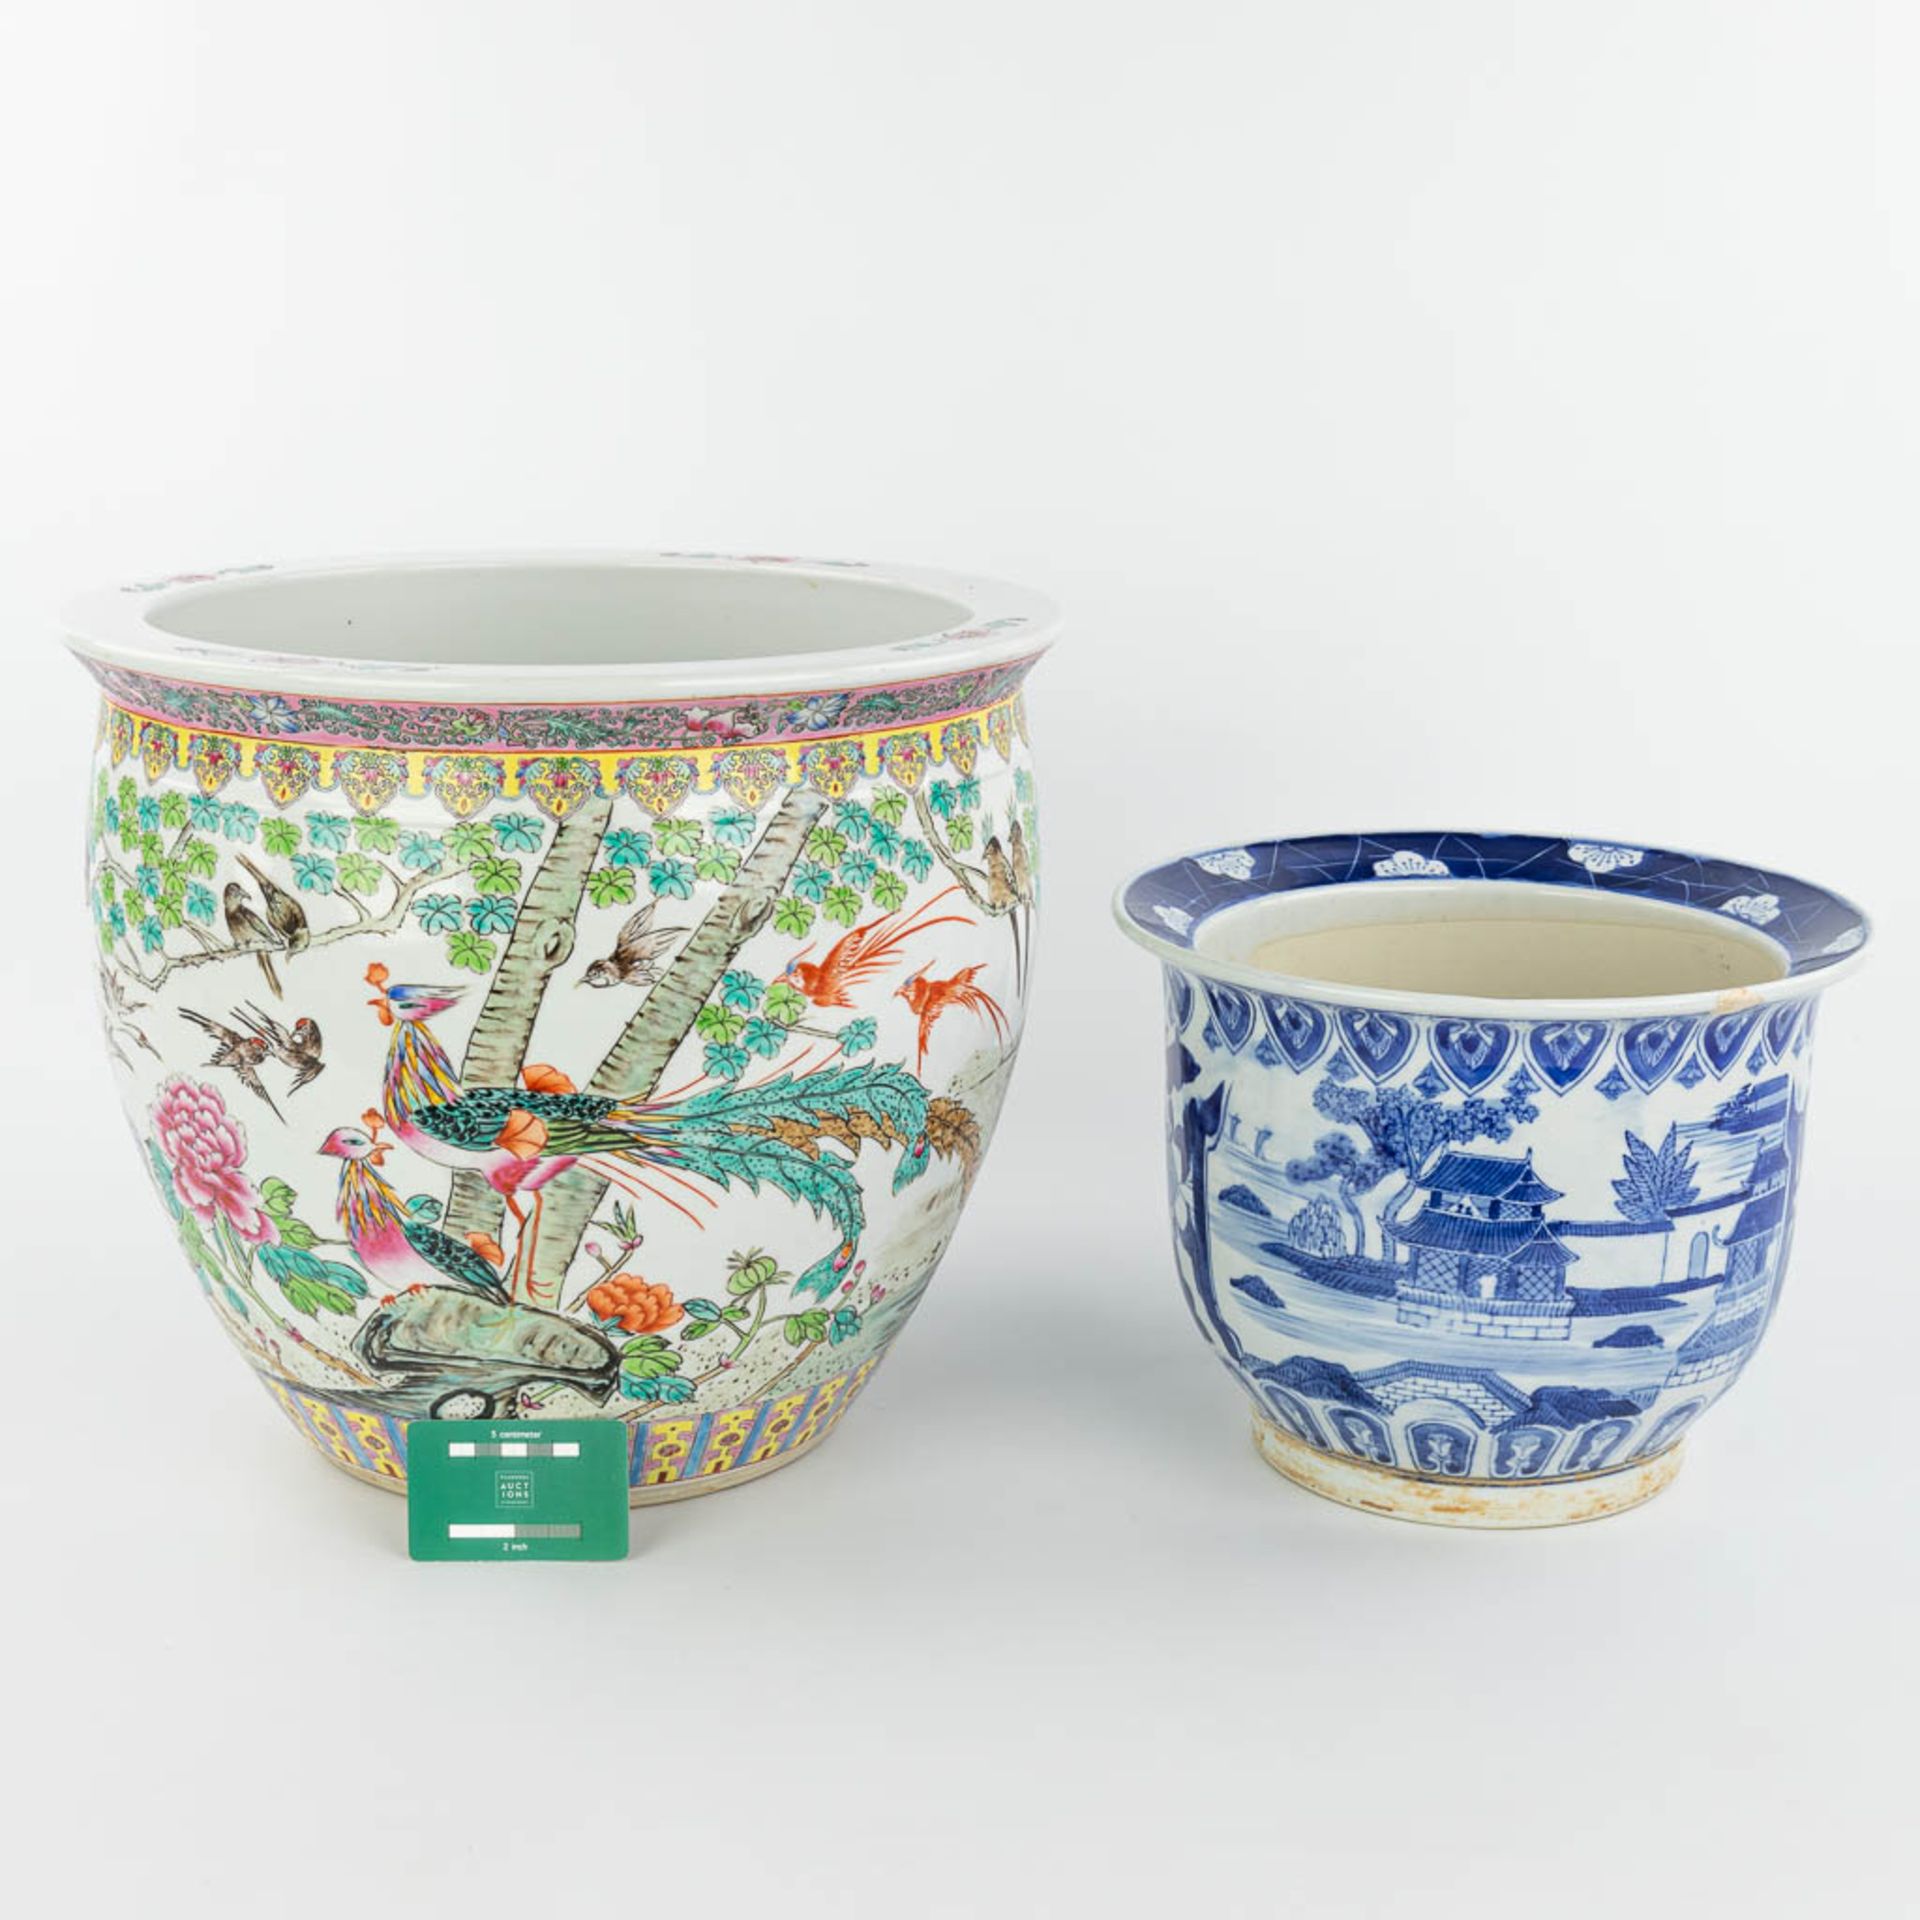 A set of 2 Chinese cache-pots made of porcelain of which 1 has a blue-white decor and the other a de - Image 6 of 15